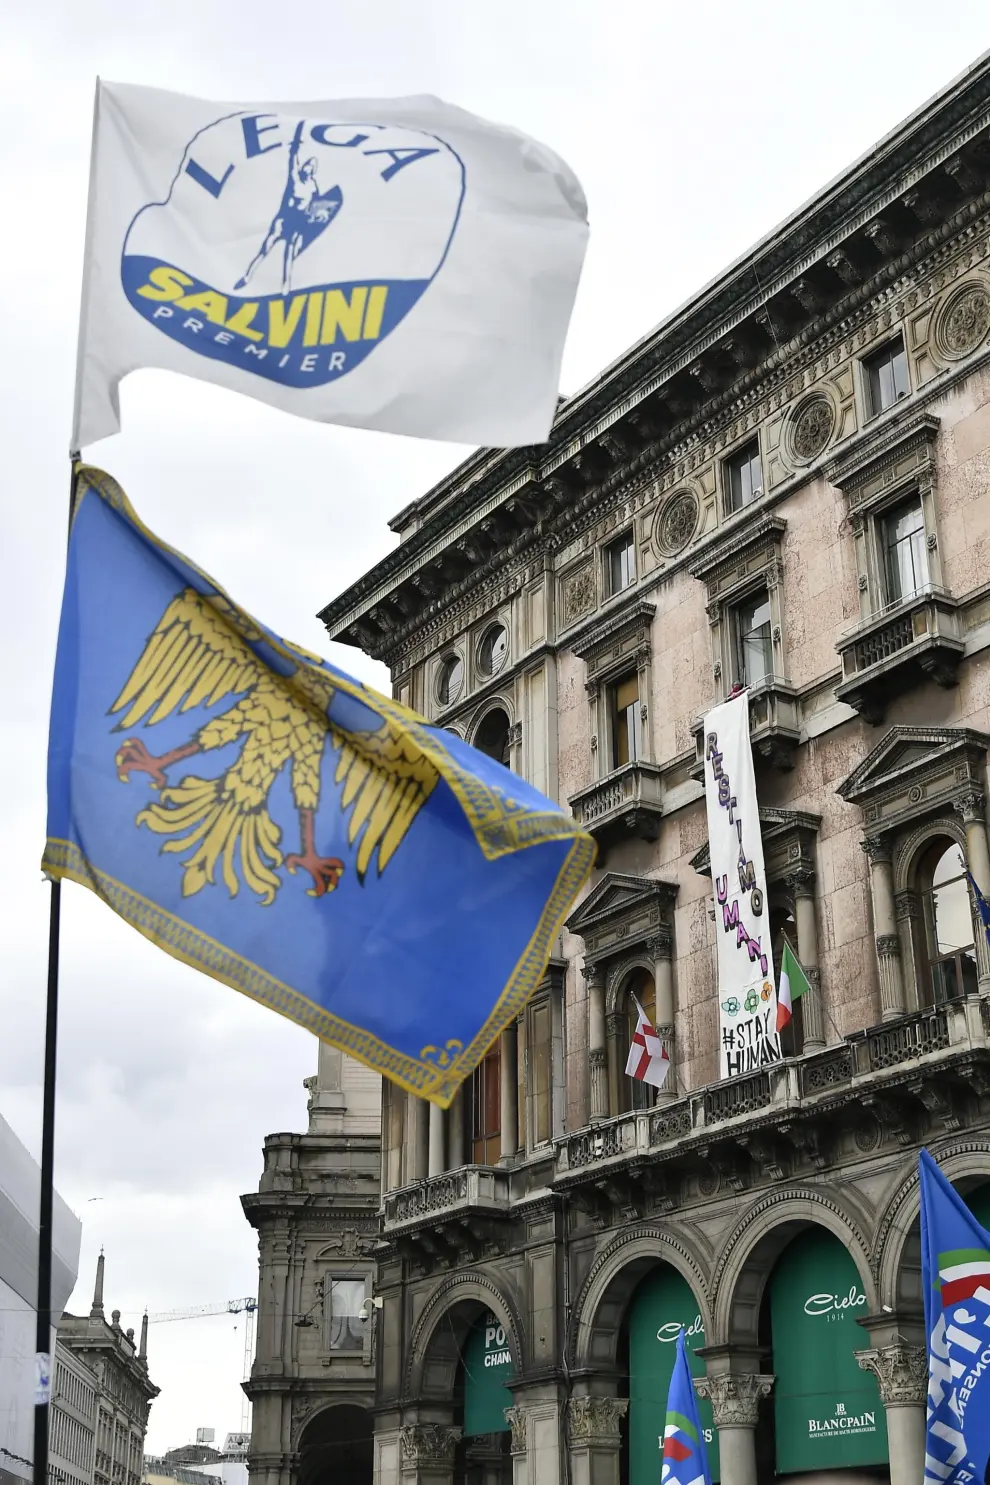 Milan (Italy), 18/05/2019.- Italian Interior Minister, Deputy Premier and leader of Italian party 'Lega' (League), Matteo Salvini, arrives for a political rally in Duomo Square with other European populist parties, in Milan, northern Italy, 18 May 2019. (Elecciones, Italia) EFE/EPA/MATTEO BAZZI Election campaign rally of the Lega party in Milan